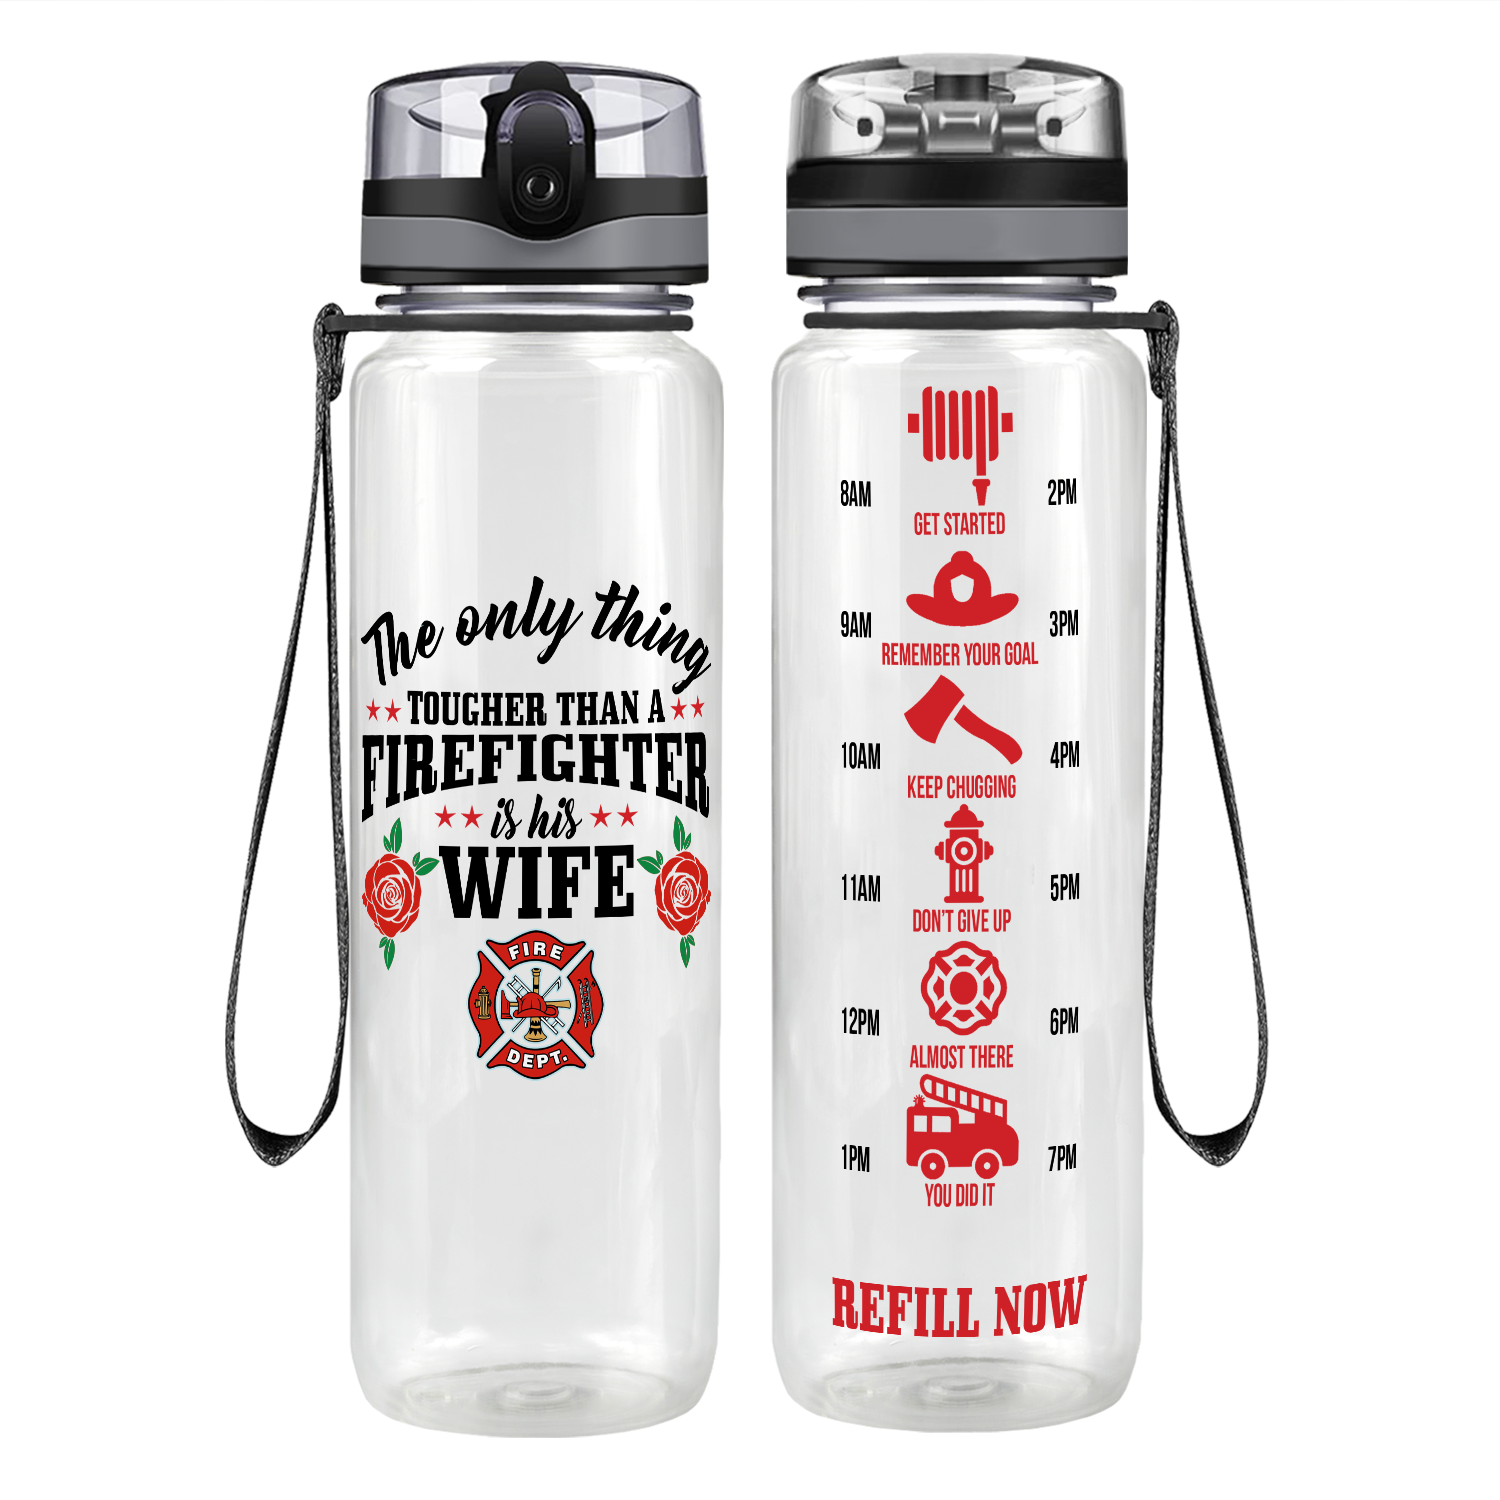 The Only Thing Tougher Than A Firefighter Is His Wife Motivational Tracking Water Bottle